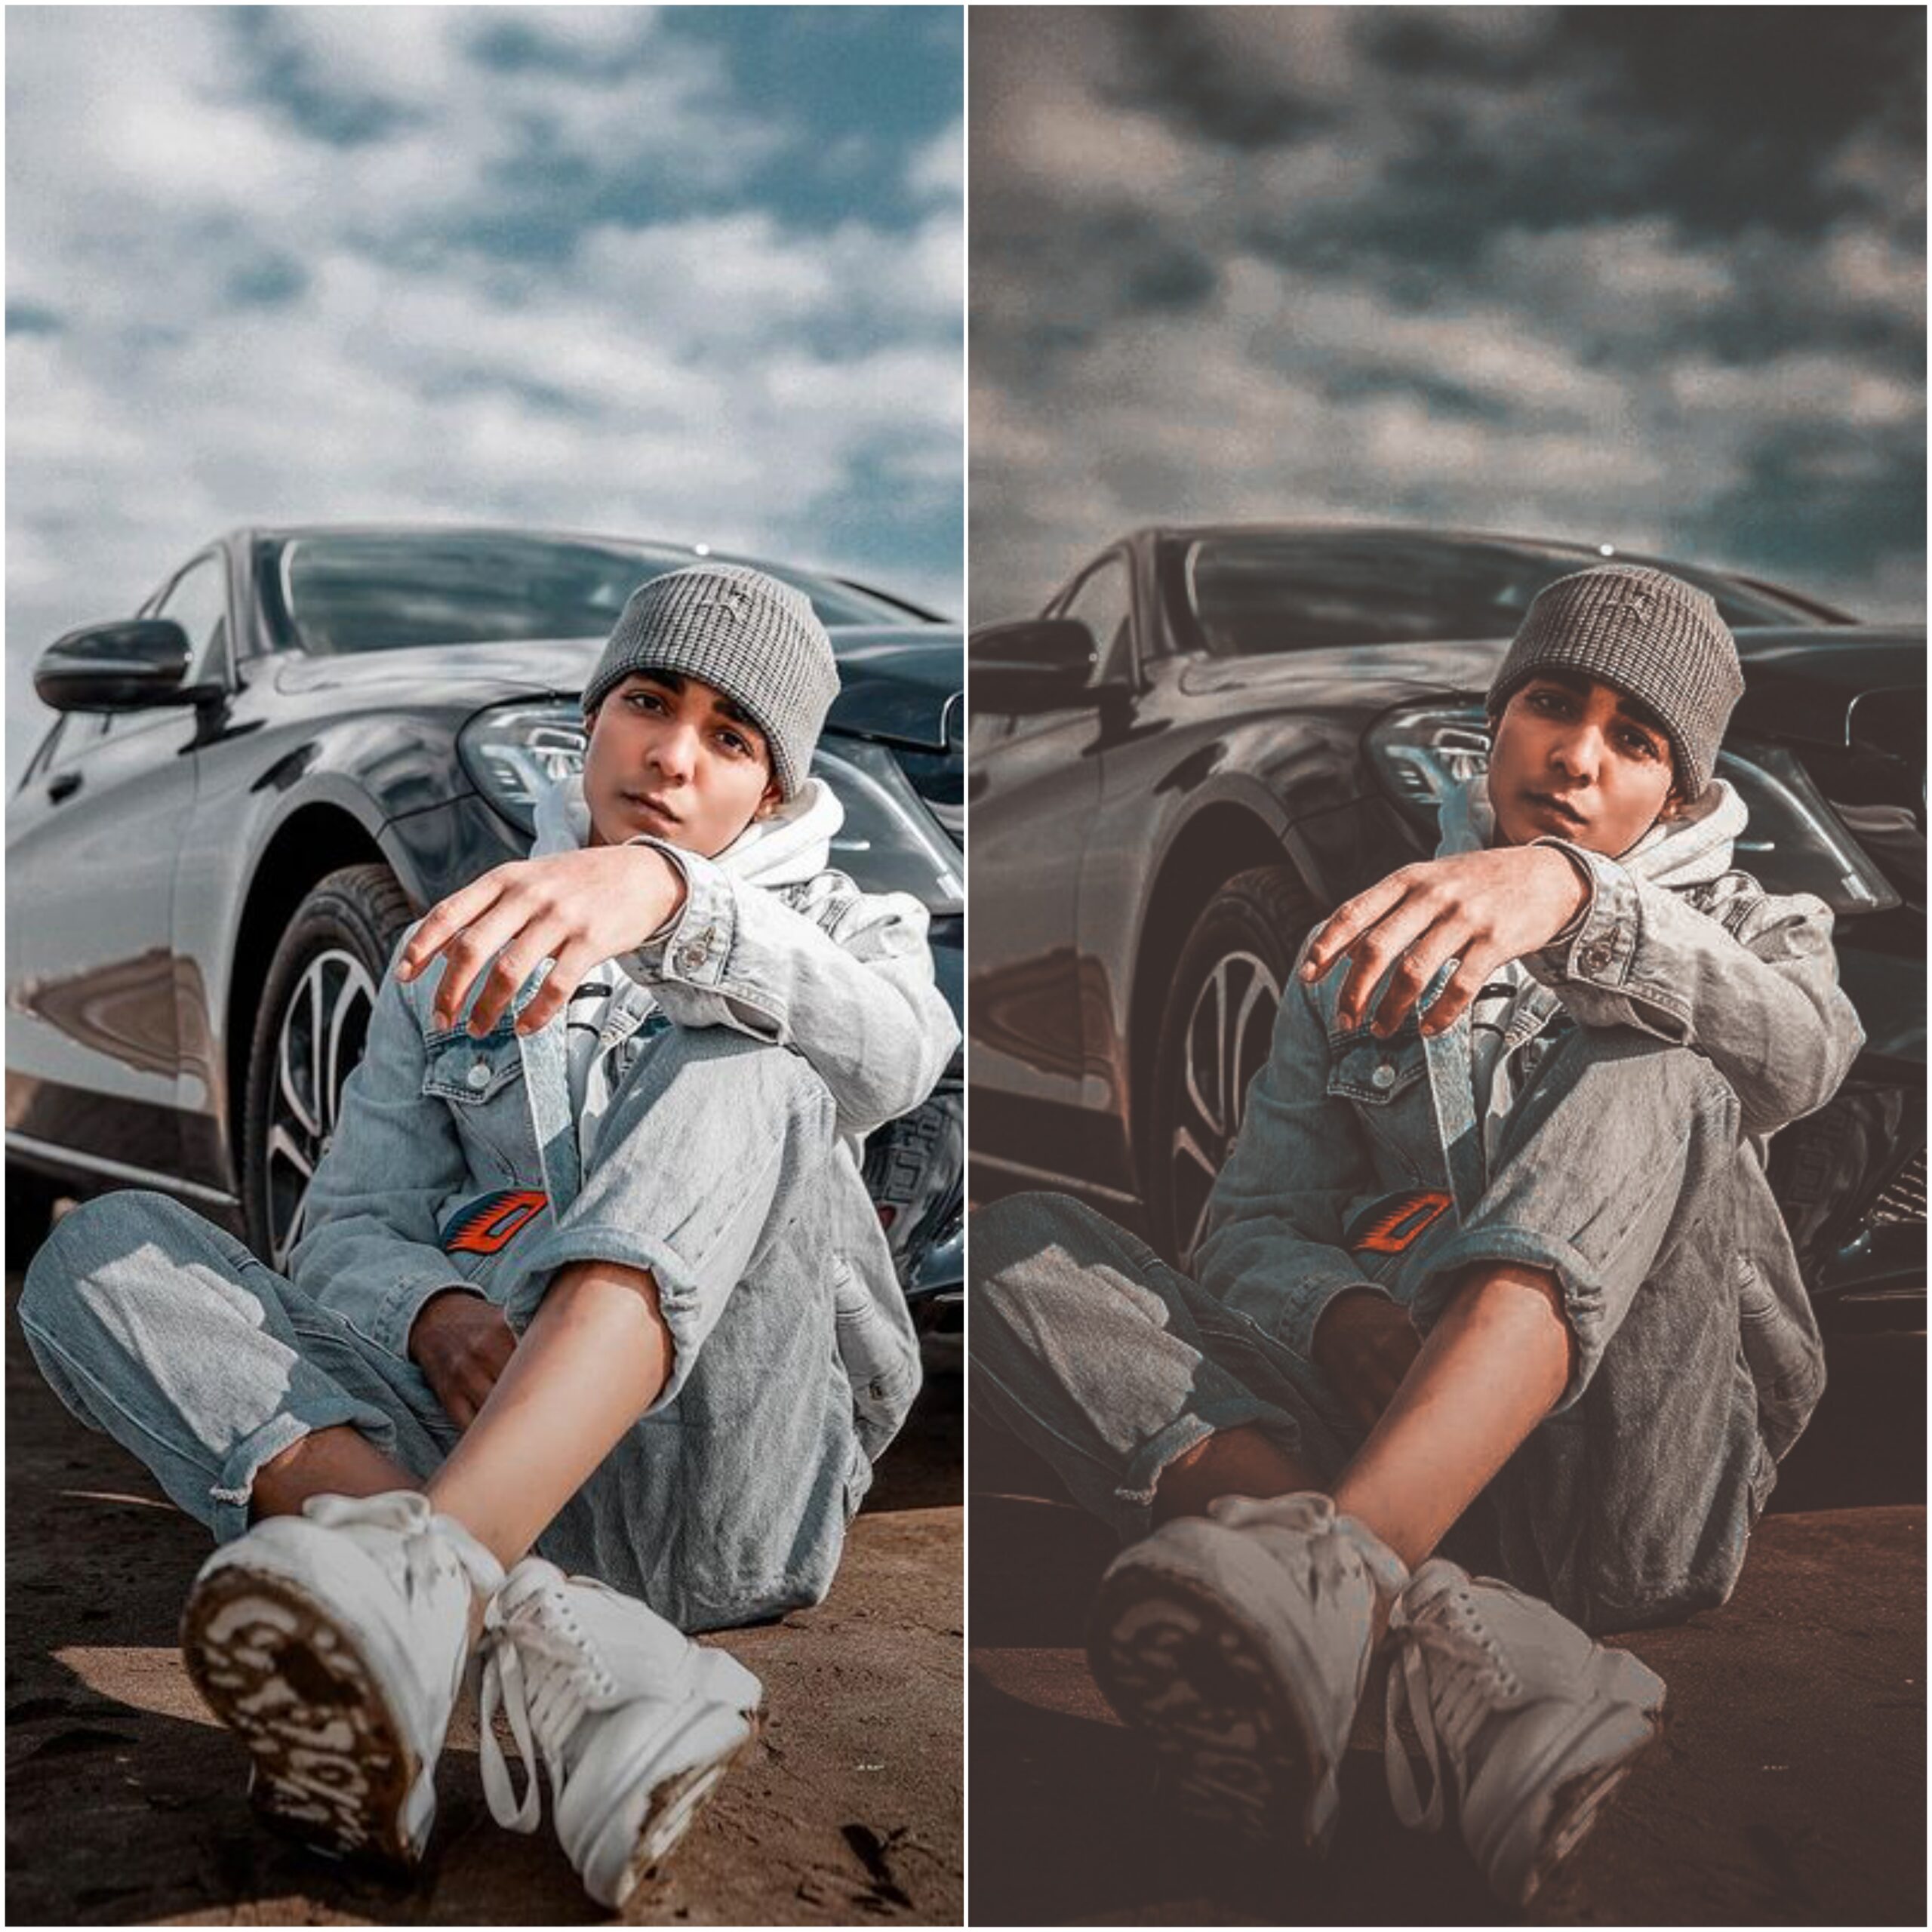 Who is the most Popular Lightroom Presets 